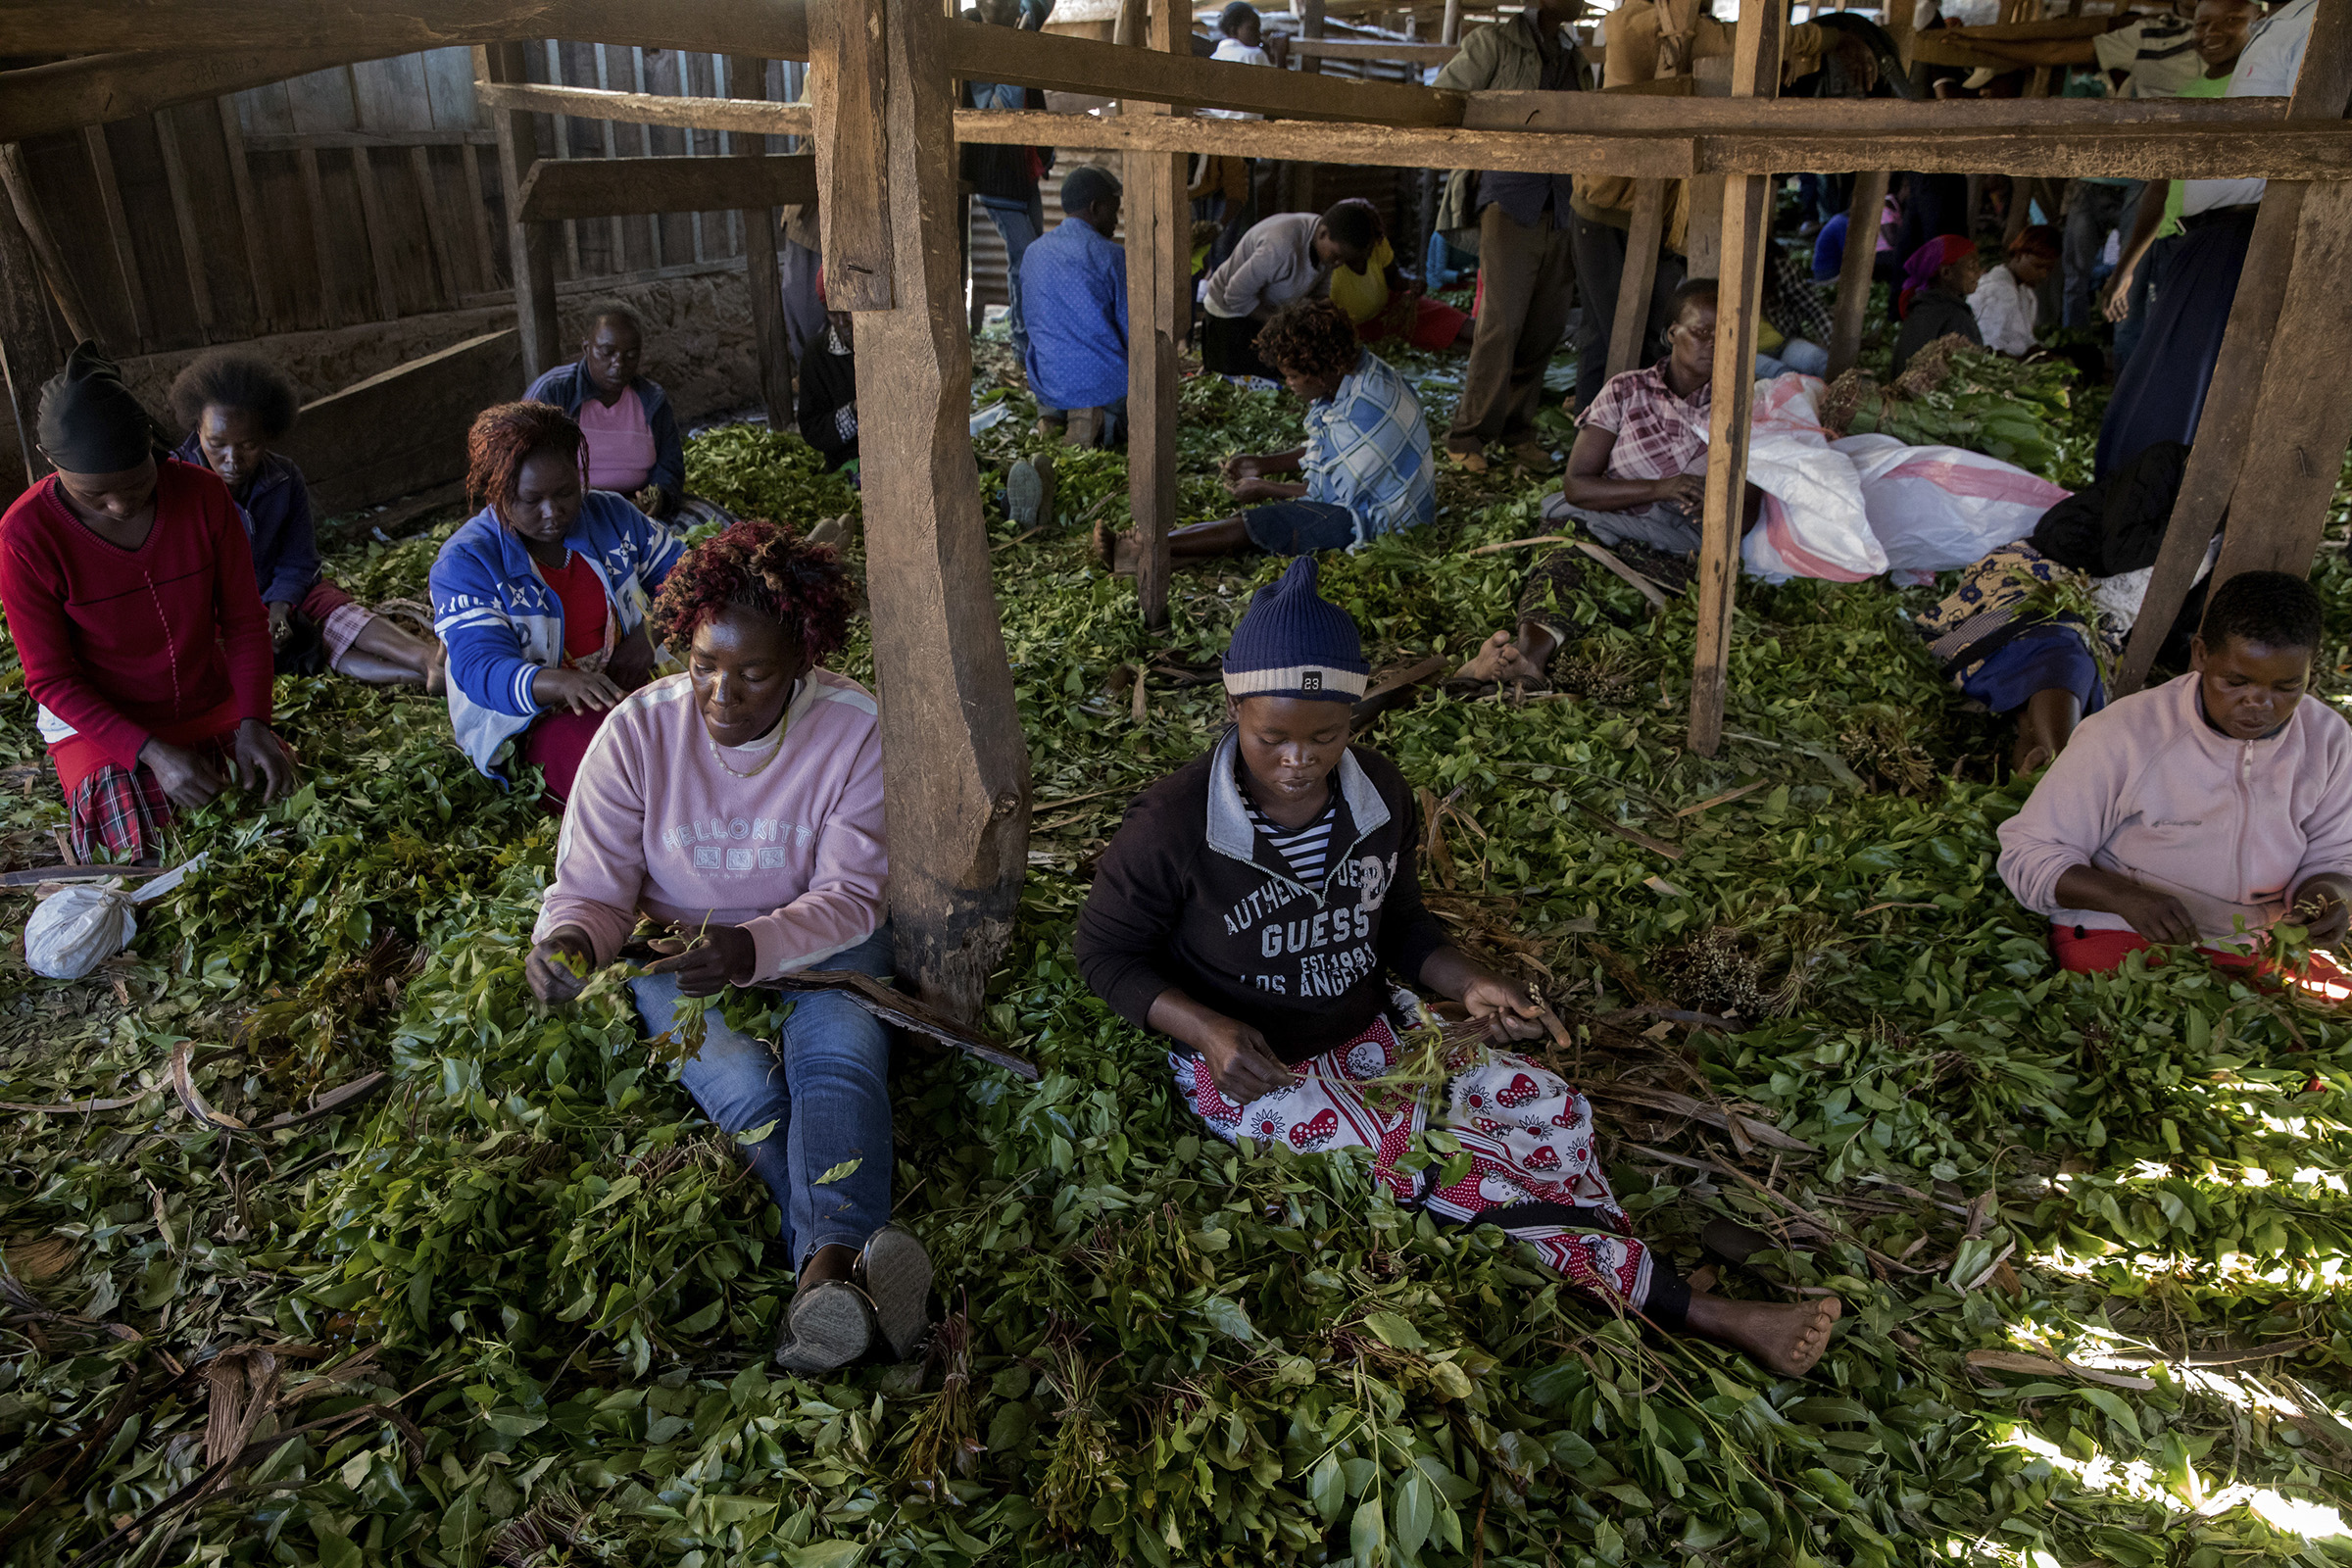 Women make packages of khat leaves using banana leaves to wrap the drug at Athiru Gaiti's (Atherogaitu) khat market in Kenya in 2017. (Pascal Maitre—Panos Pictures/Redux)